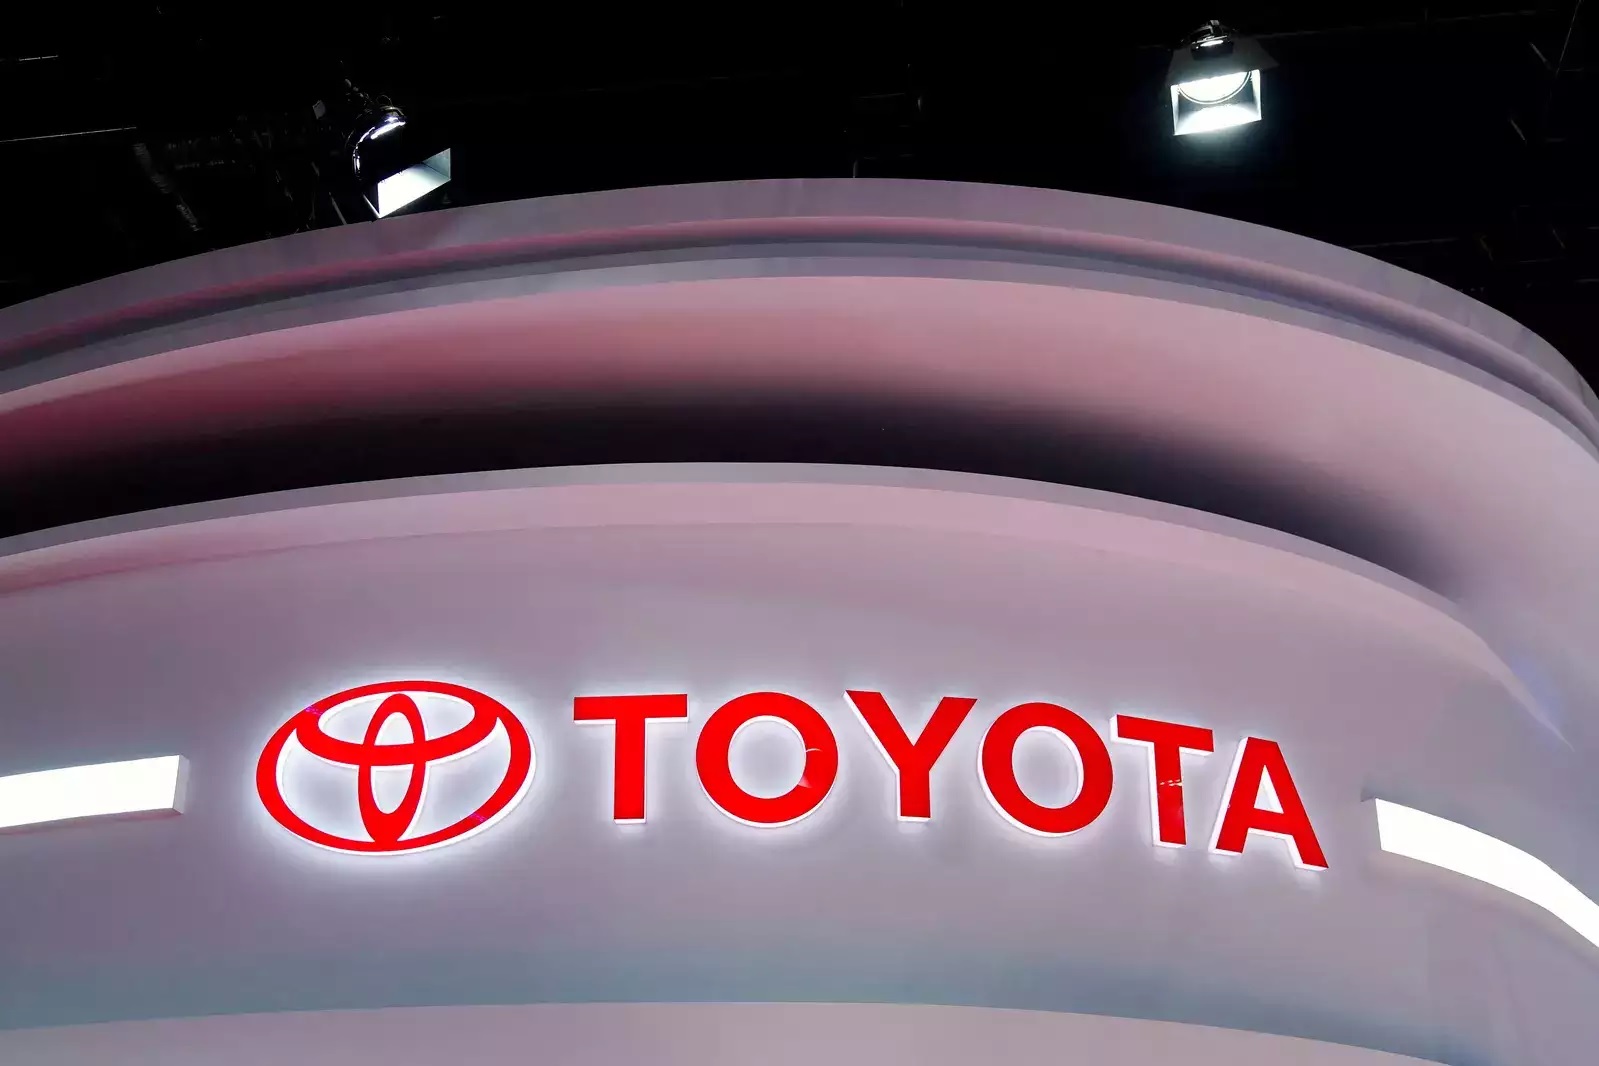 Toyota to produce electric car powered by BYD batteries in China